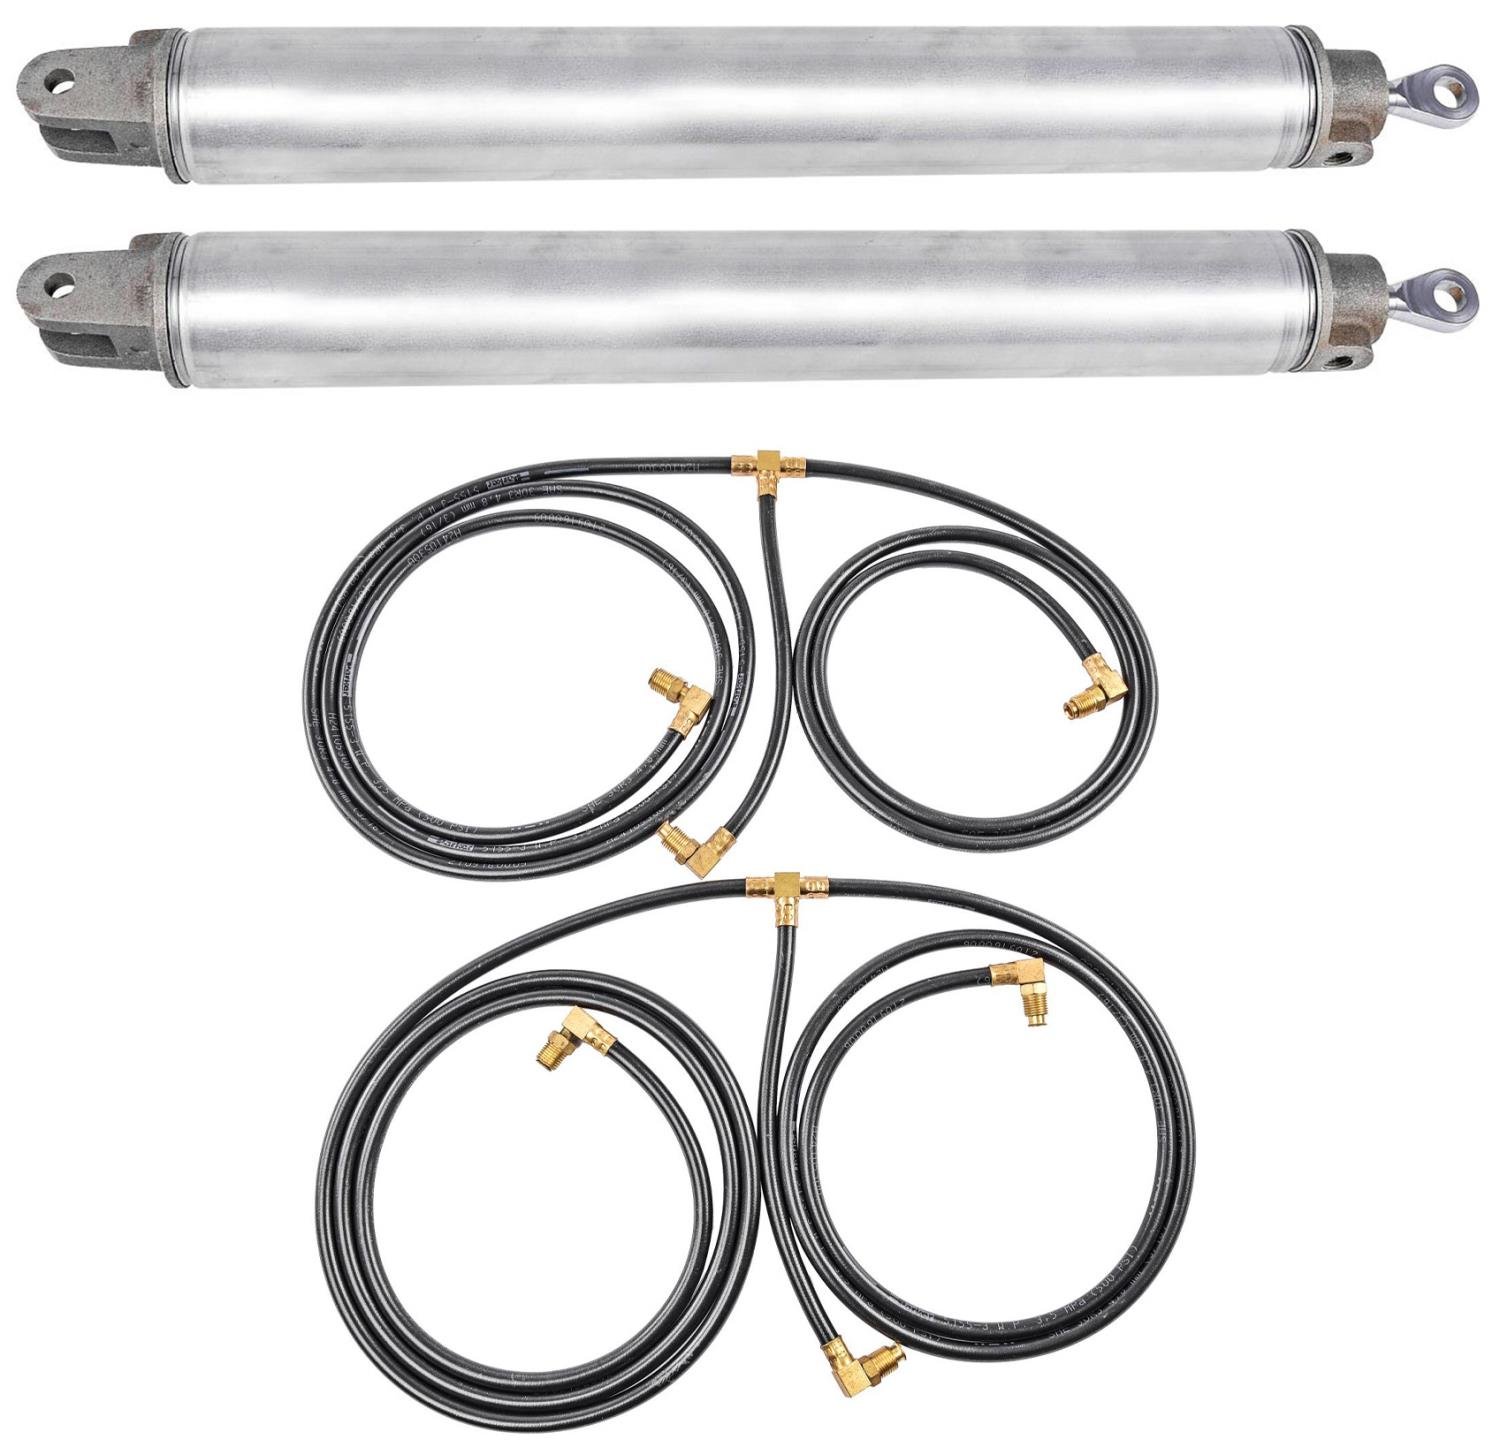 Convertible Top Cylinder & Hose Kit for 1954-1956 Buick, Cadillac, Oldsmobile Convertibles [Sold as a Kit]